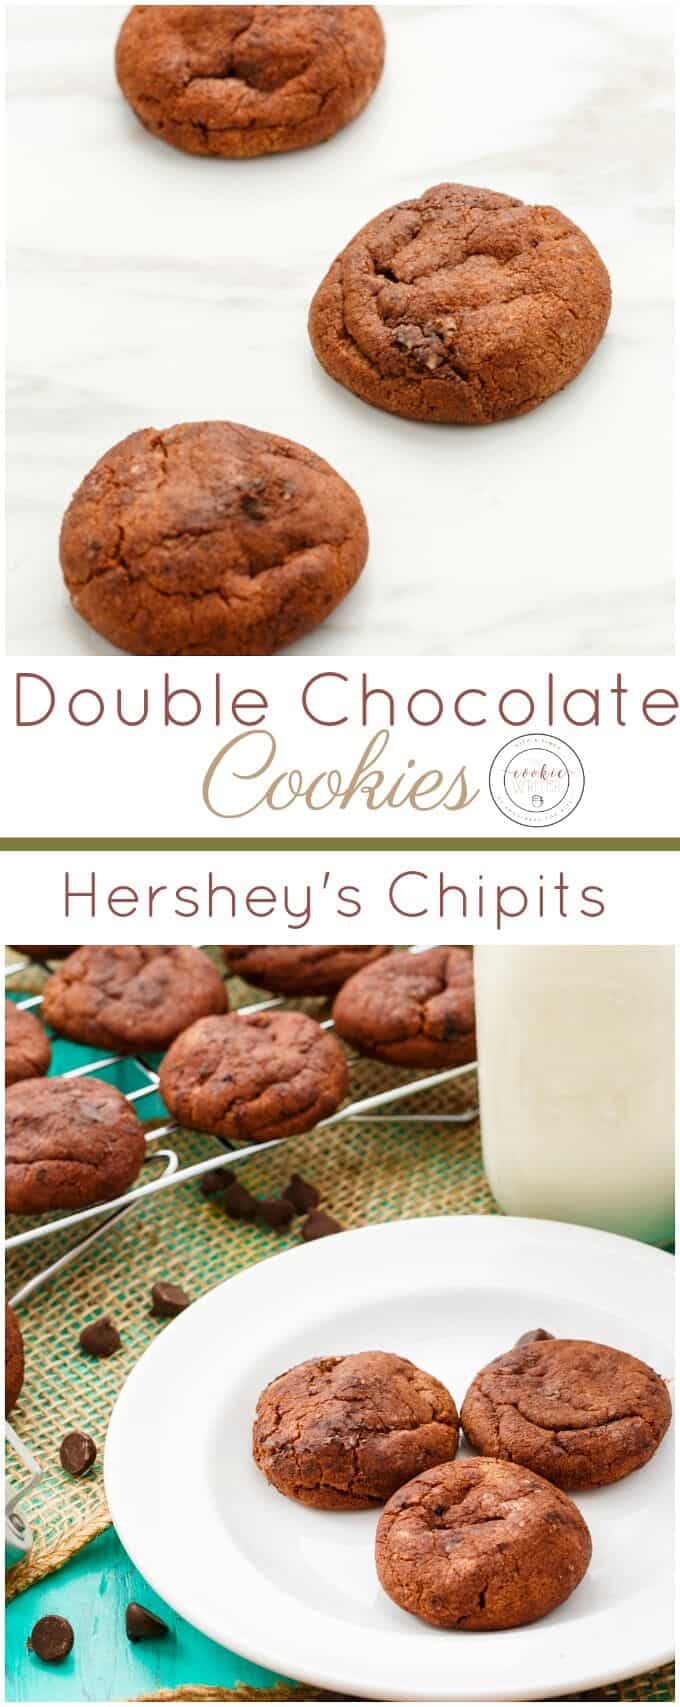 Double Chocolate Cookies with Hershey's Chipits